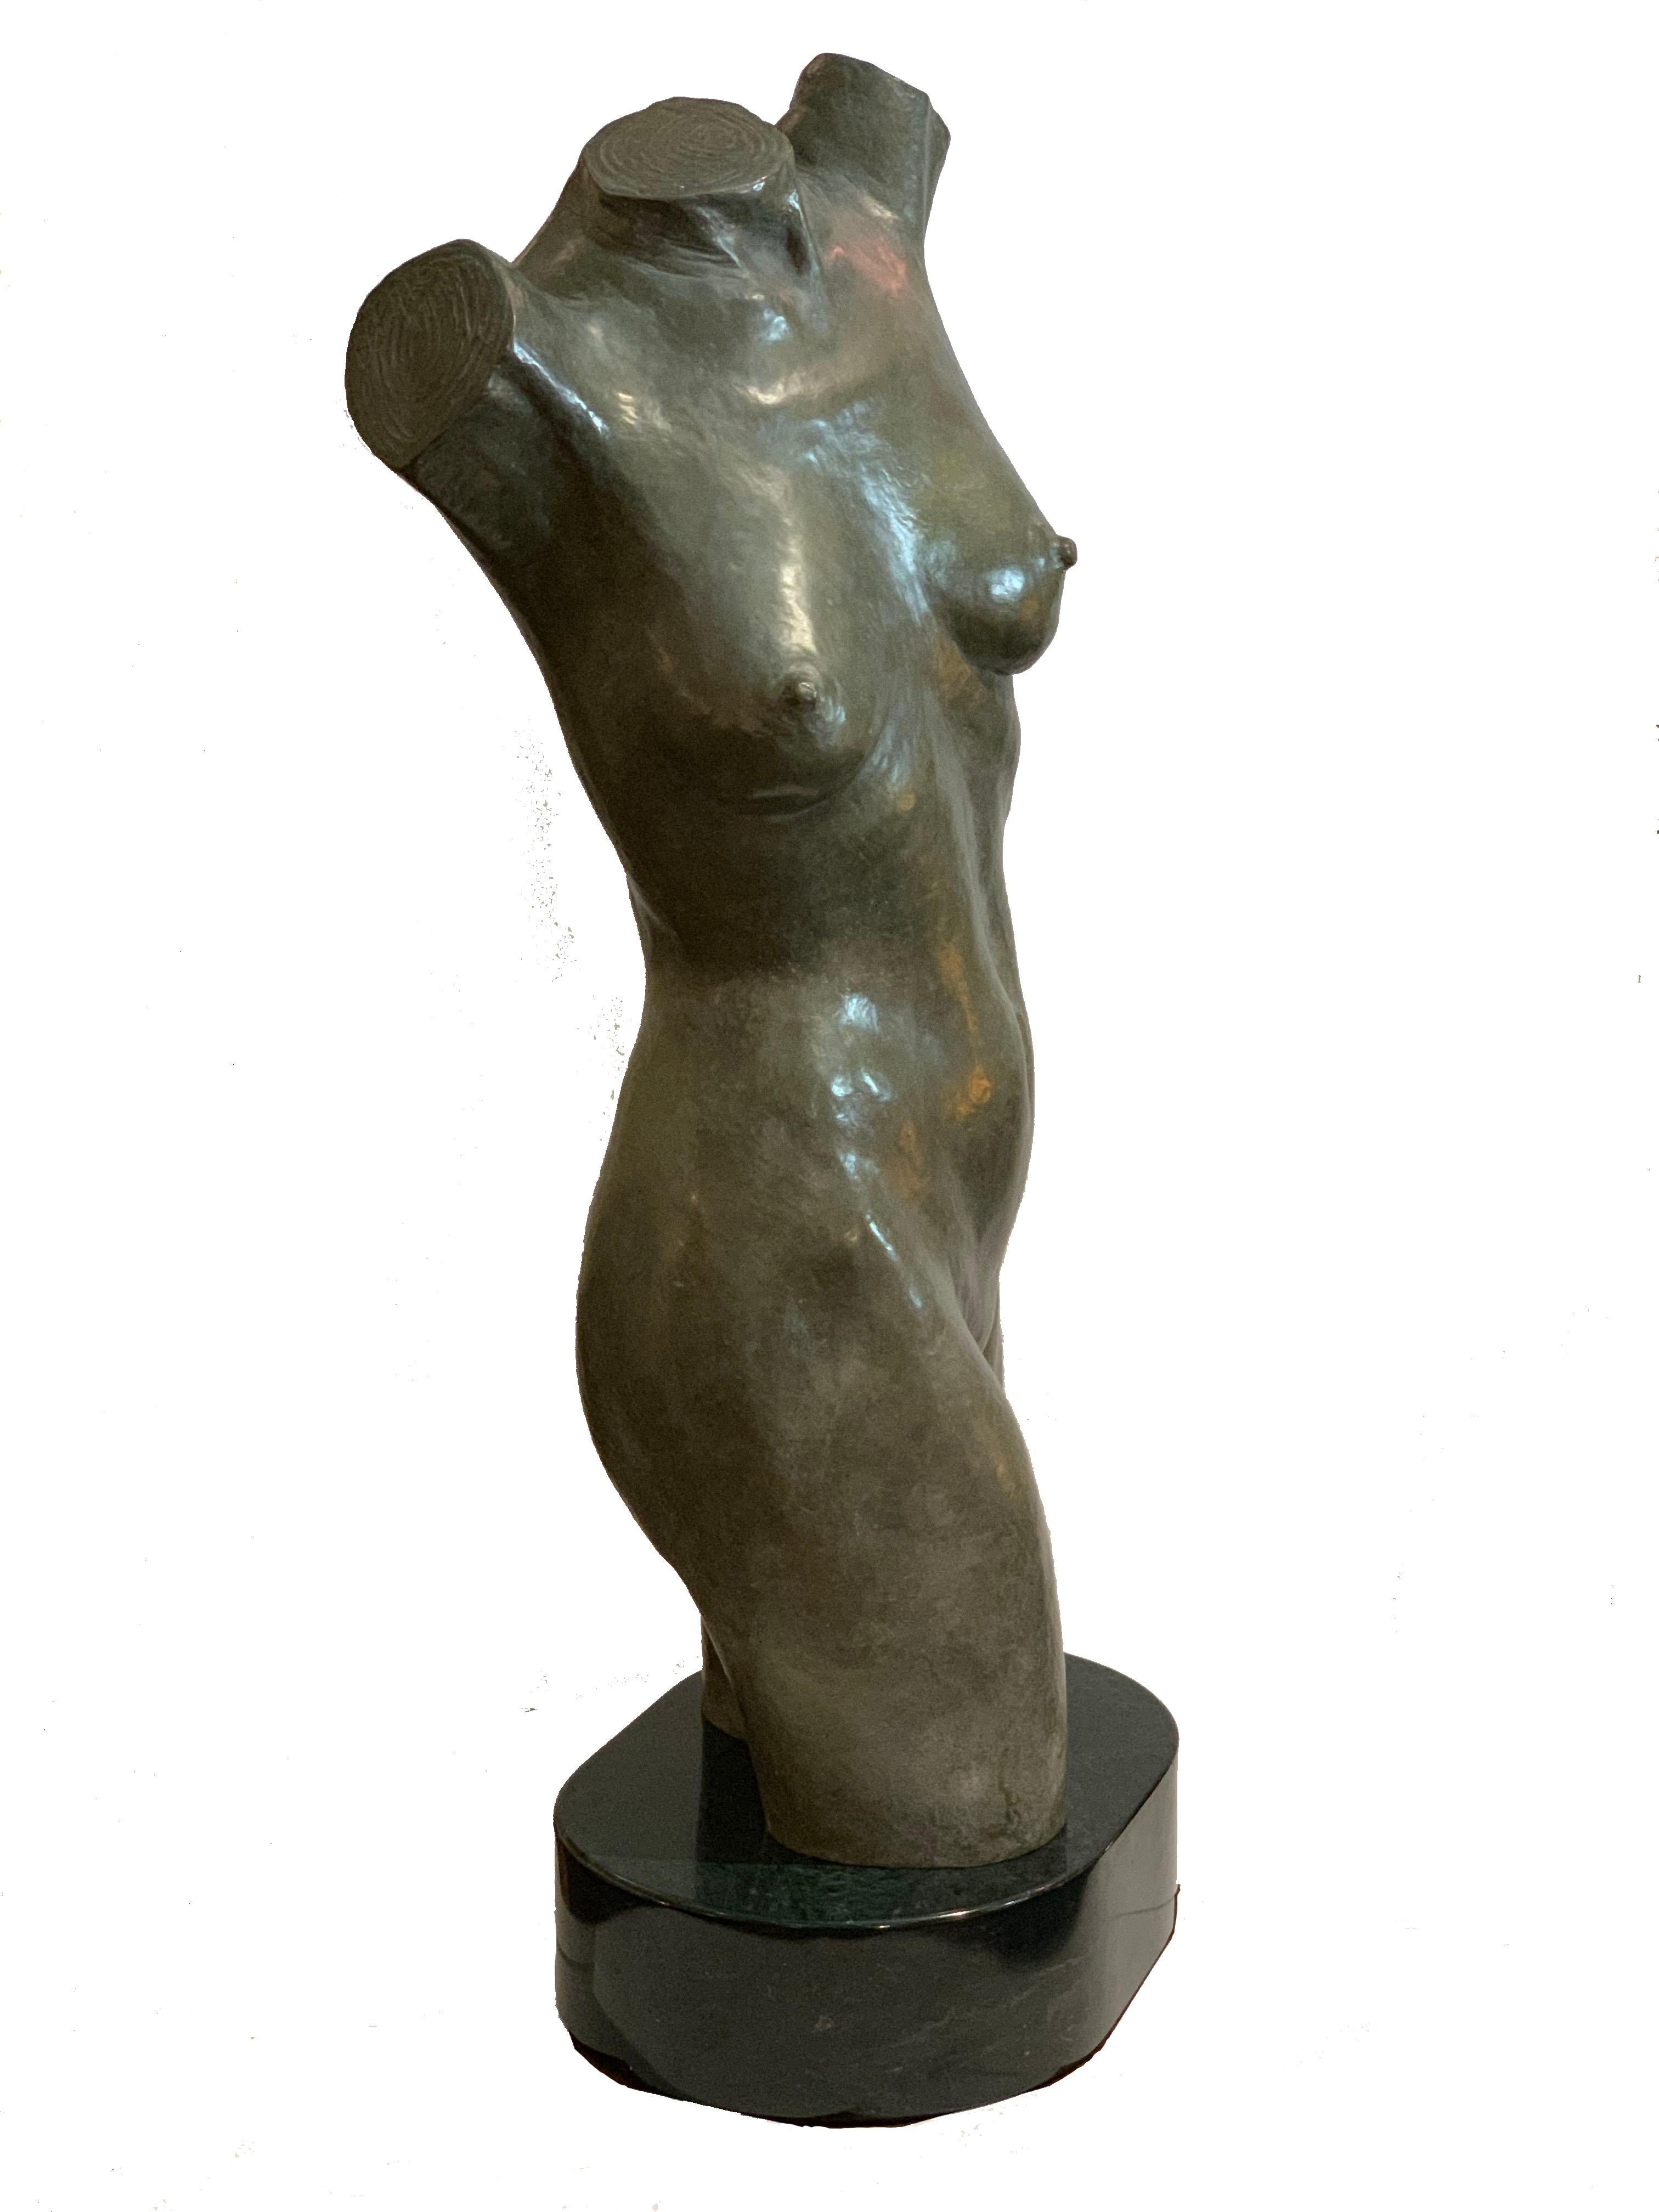 Female bronze torso in a lovely gray, original patina by Lawrence Ludtke (1929-2007), life-size, signed, numbered and dated 1988. This sculpture is #1 of 35 edition. This sculpture was referenced in the book, Life in Bronze, Lawrence Ludtke